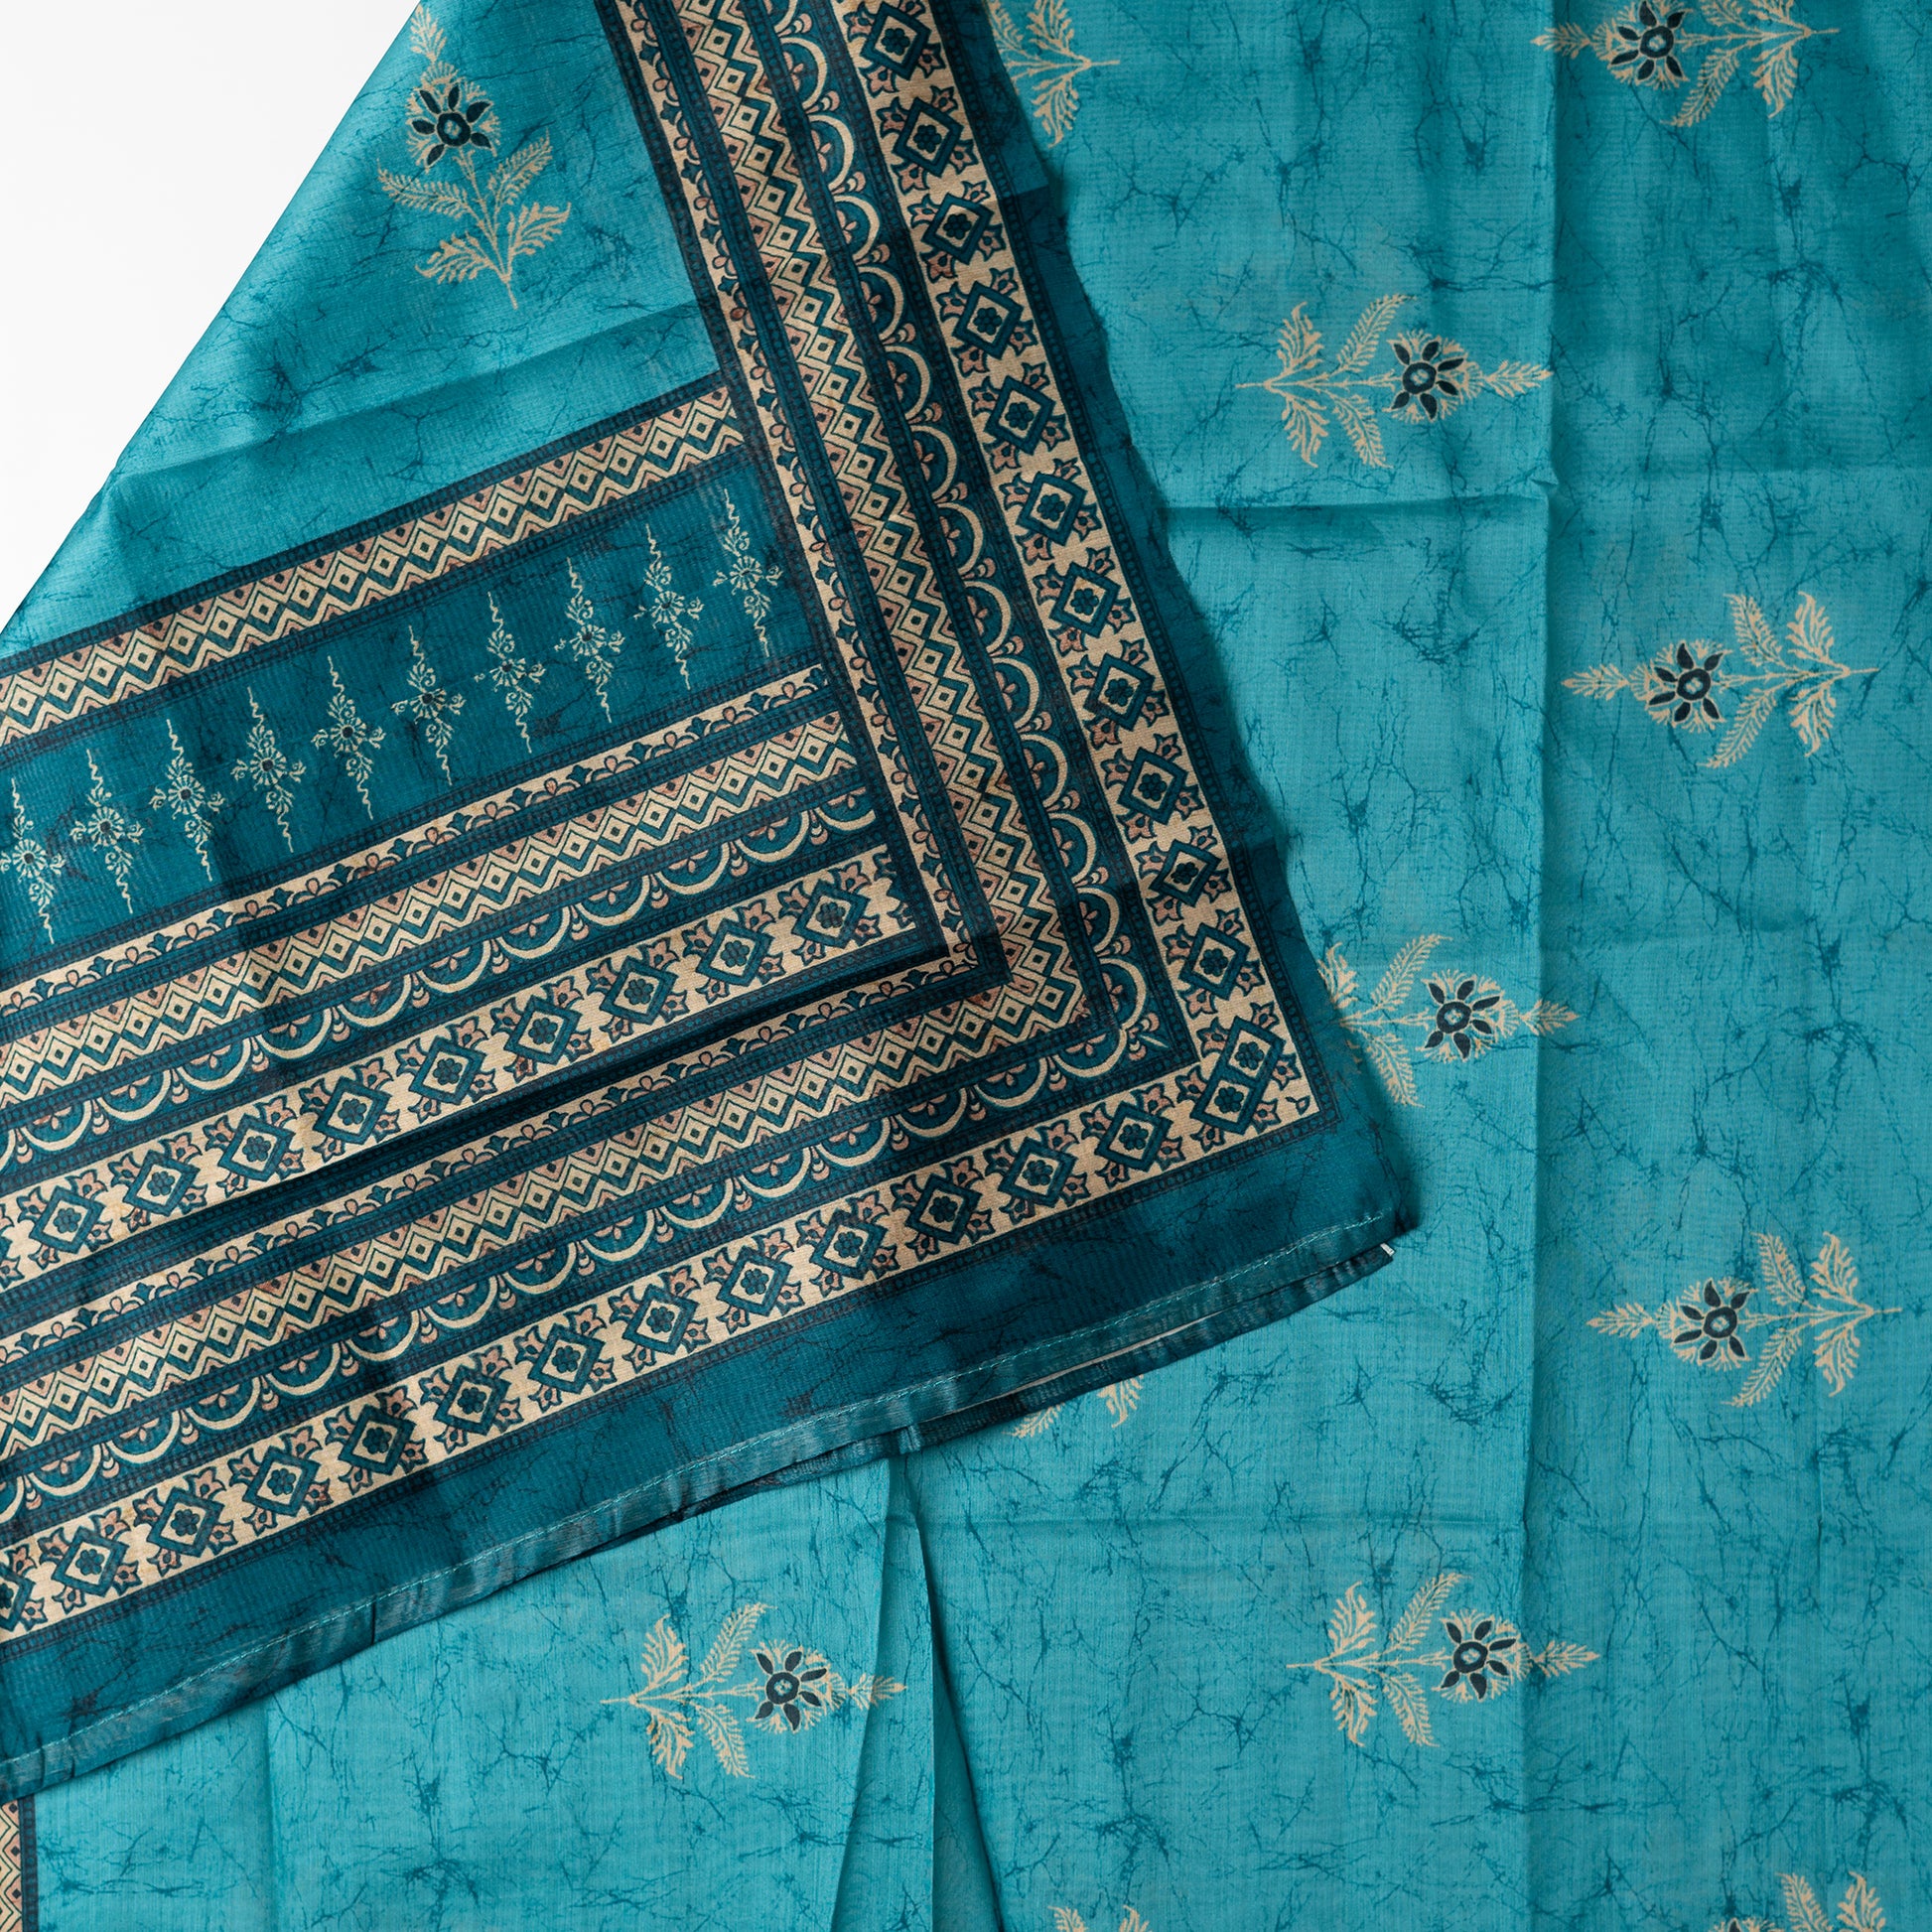 Silk dupatta with beautiful digital prints matching the top teal blue color. 